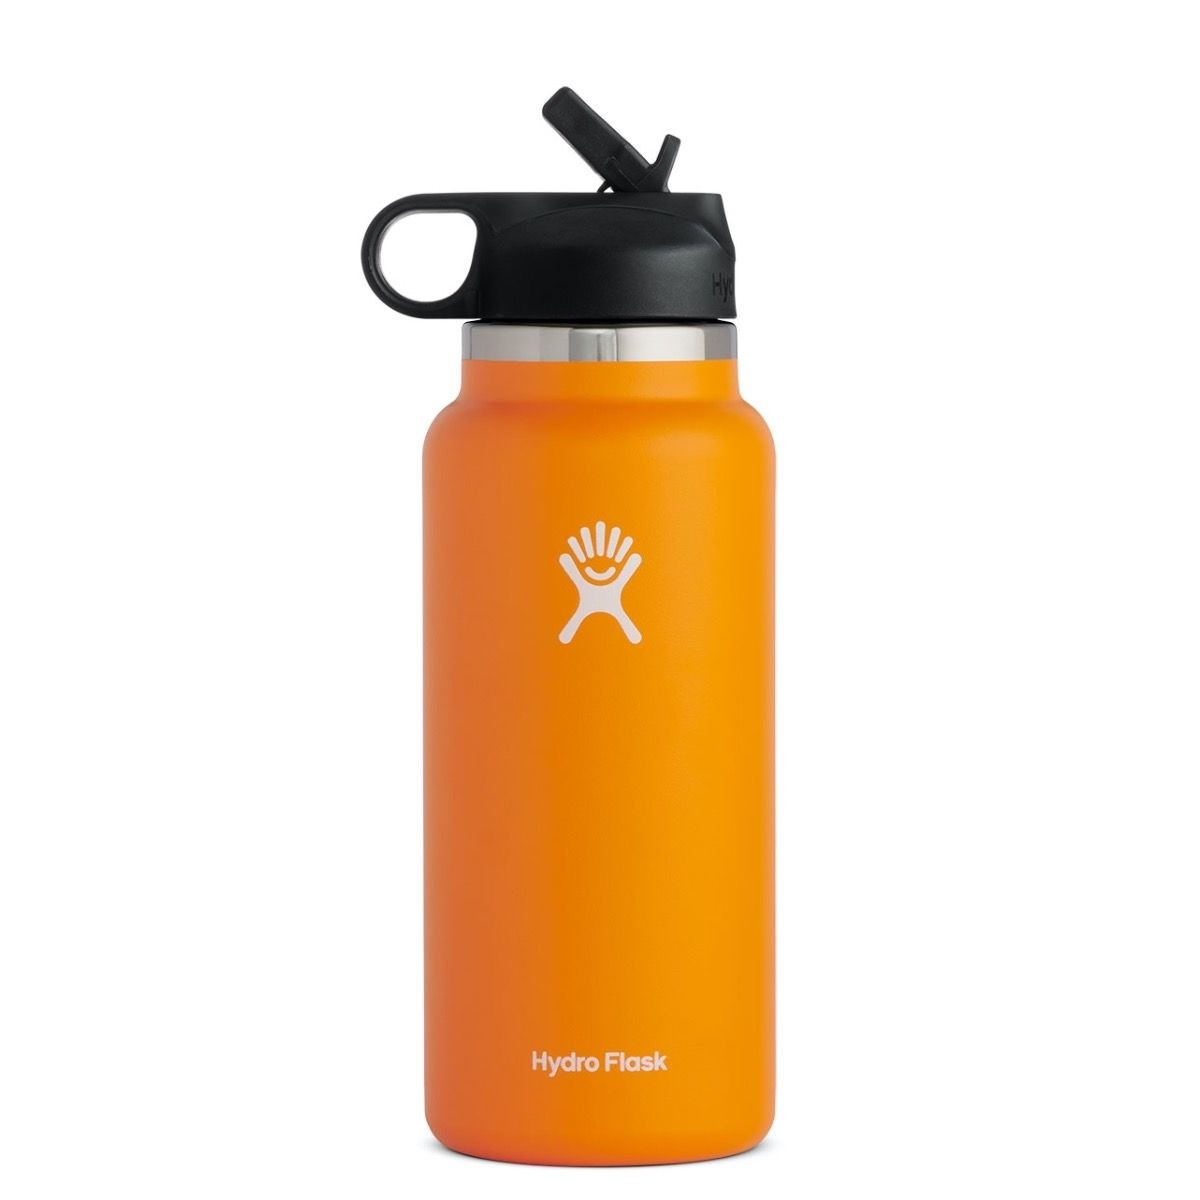 An orange water bottle with a straw lid.